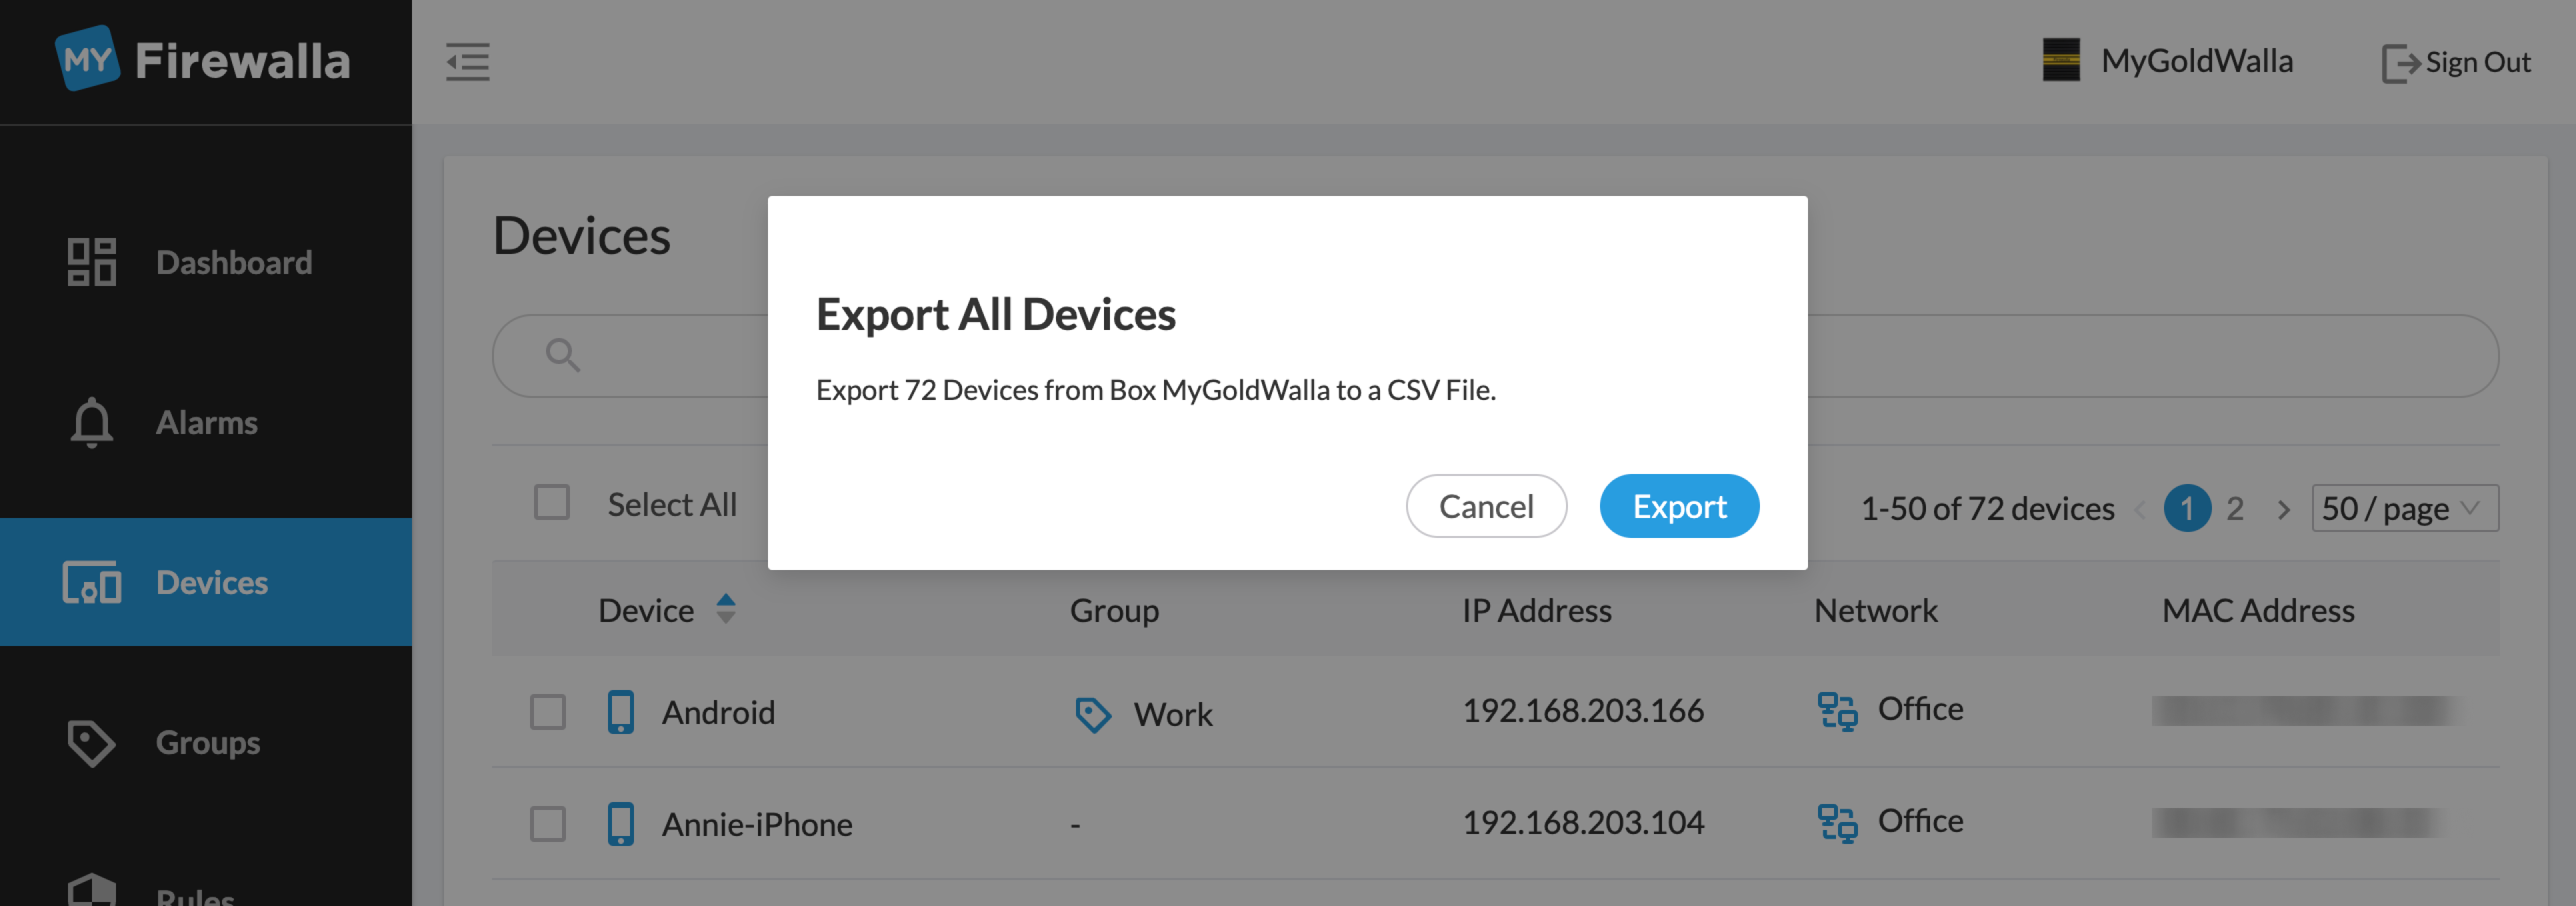 Firewalla Web Interface Export to .csv Prompt